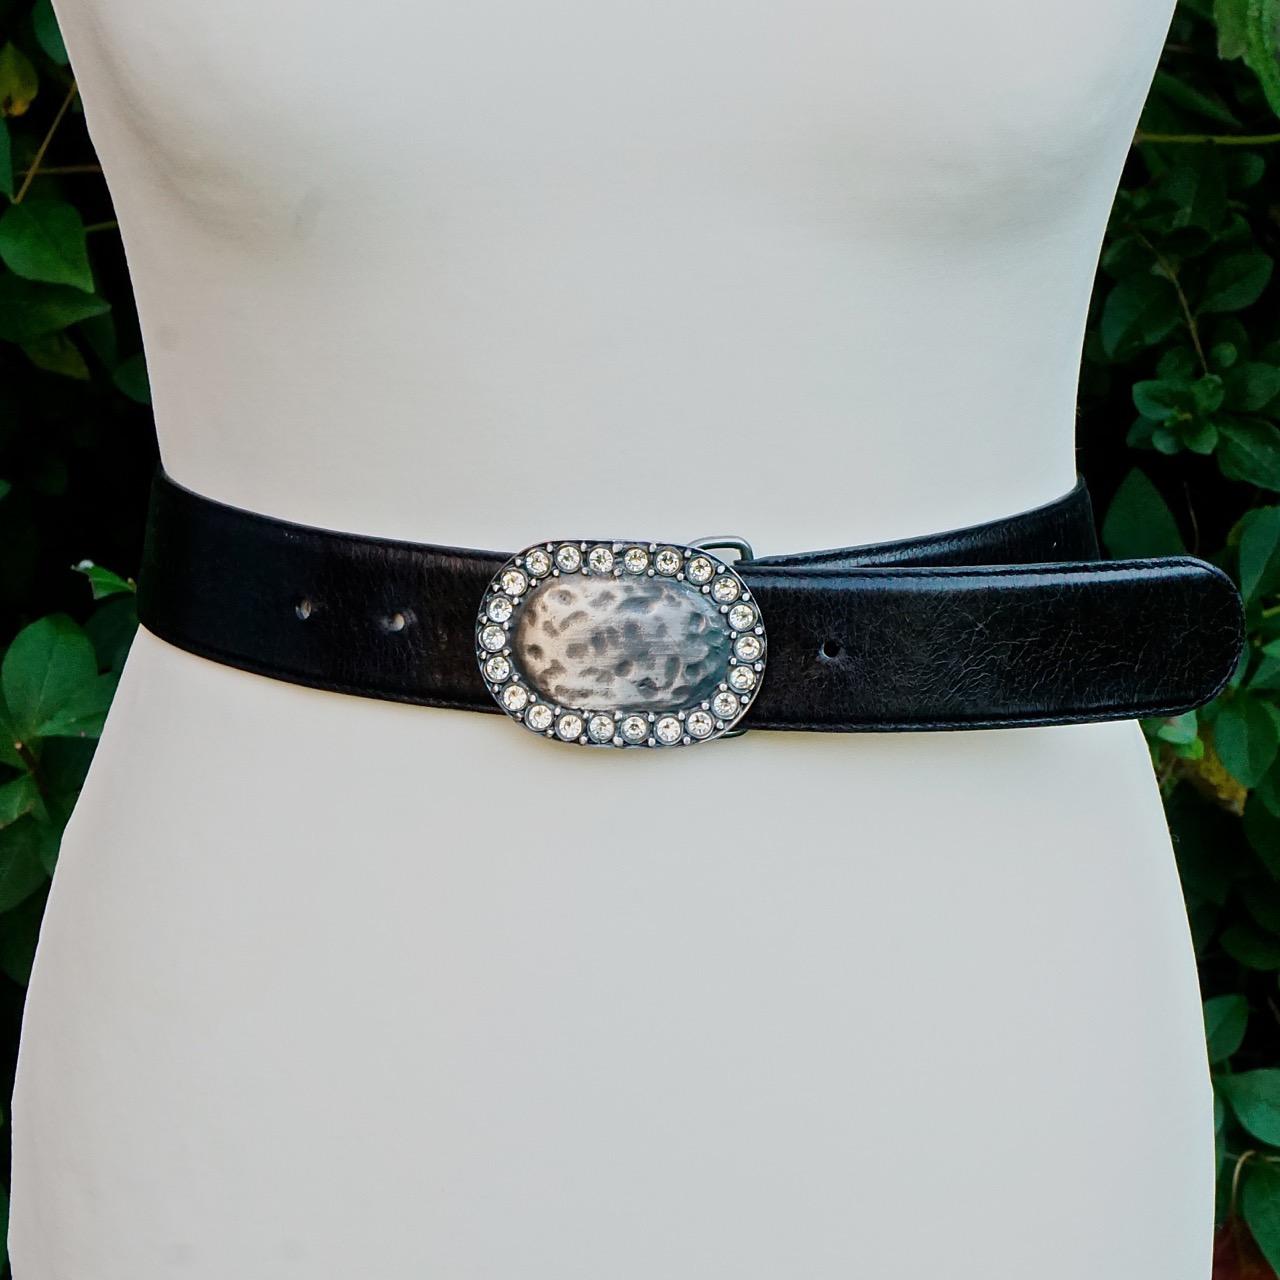 Clara Perri black leather belt, featuring a beautiful oval aged silver tone buckle surrounded with clear crystals. The belt is adjustable, from a wearable length of 103cm / 40.5 inches to 90cm /  35.4 inches, and the width is 3.8cm / 1.5 inches. The